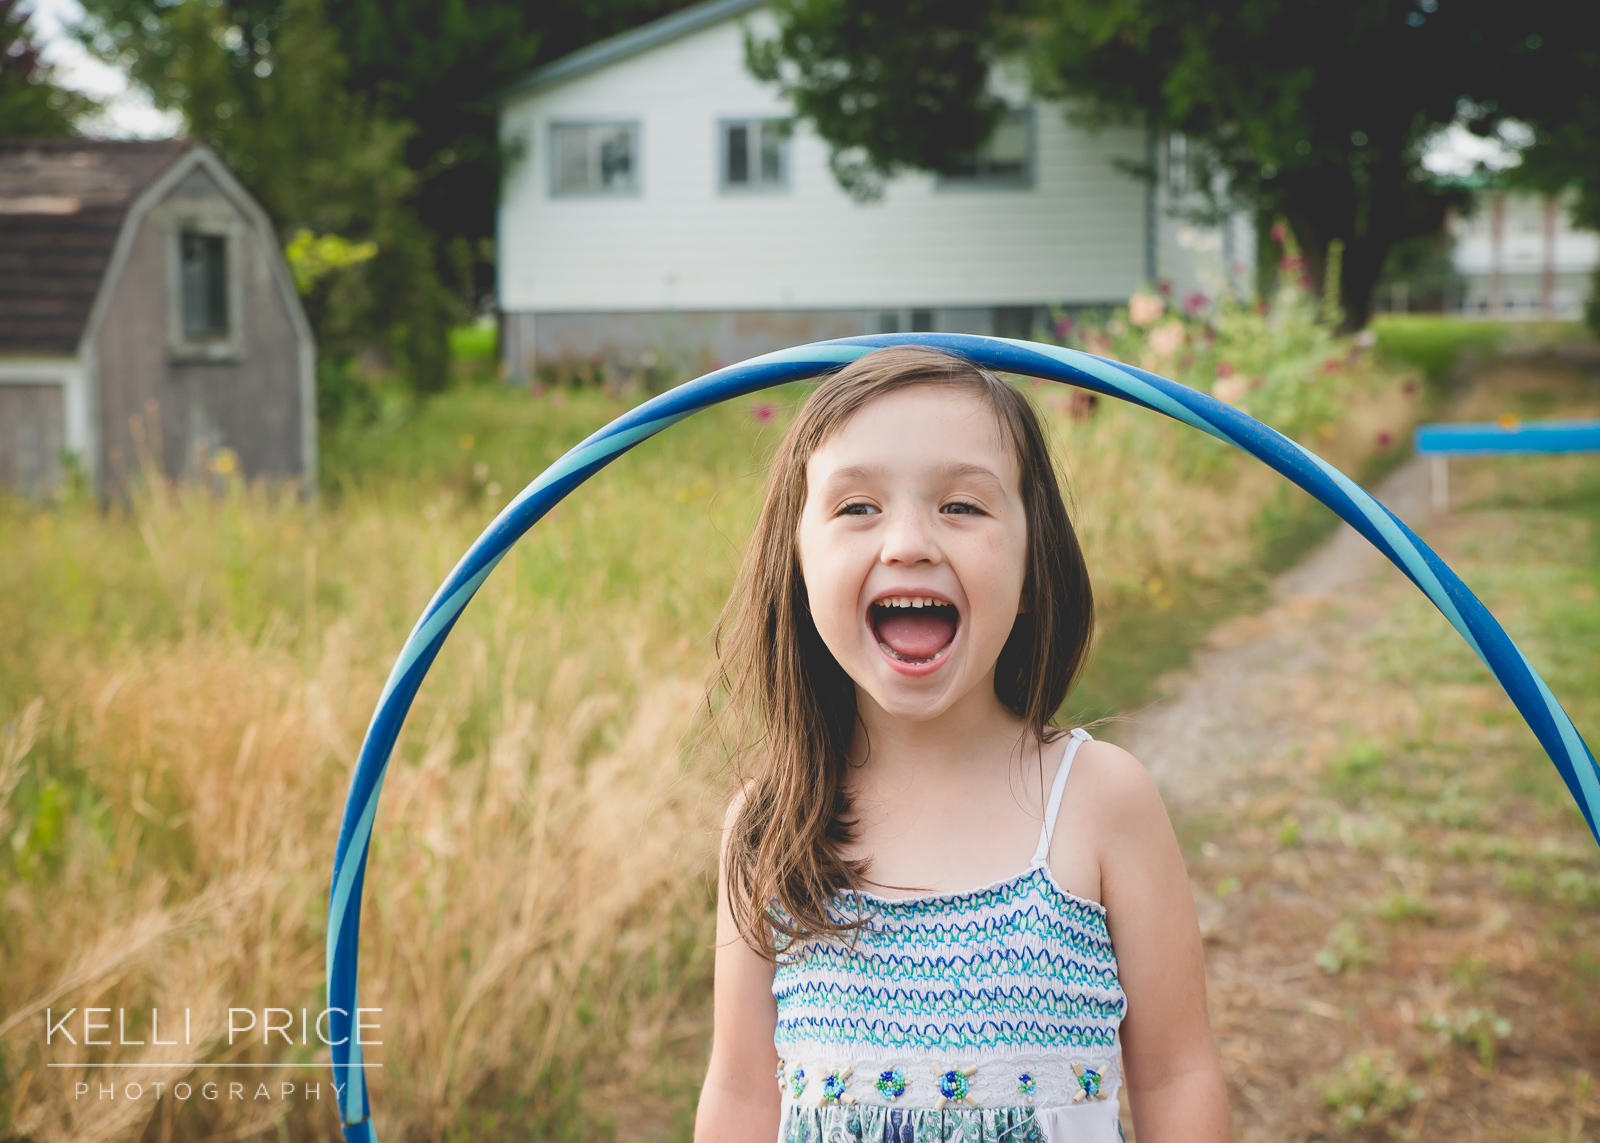 Bloopers18KelliPricePhotographyJuly2015.jpg